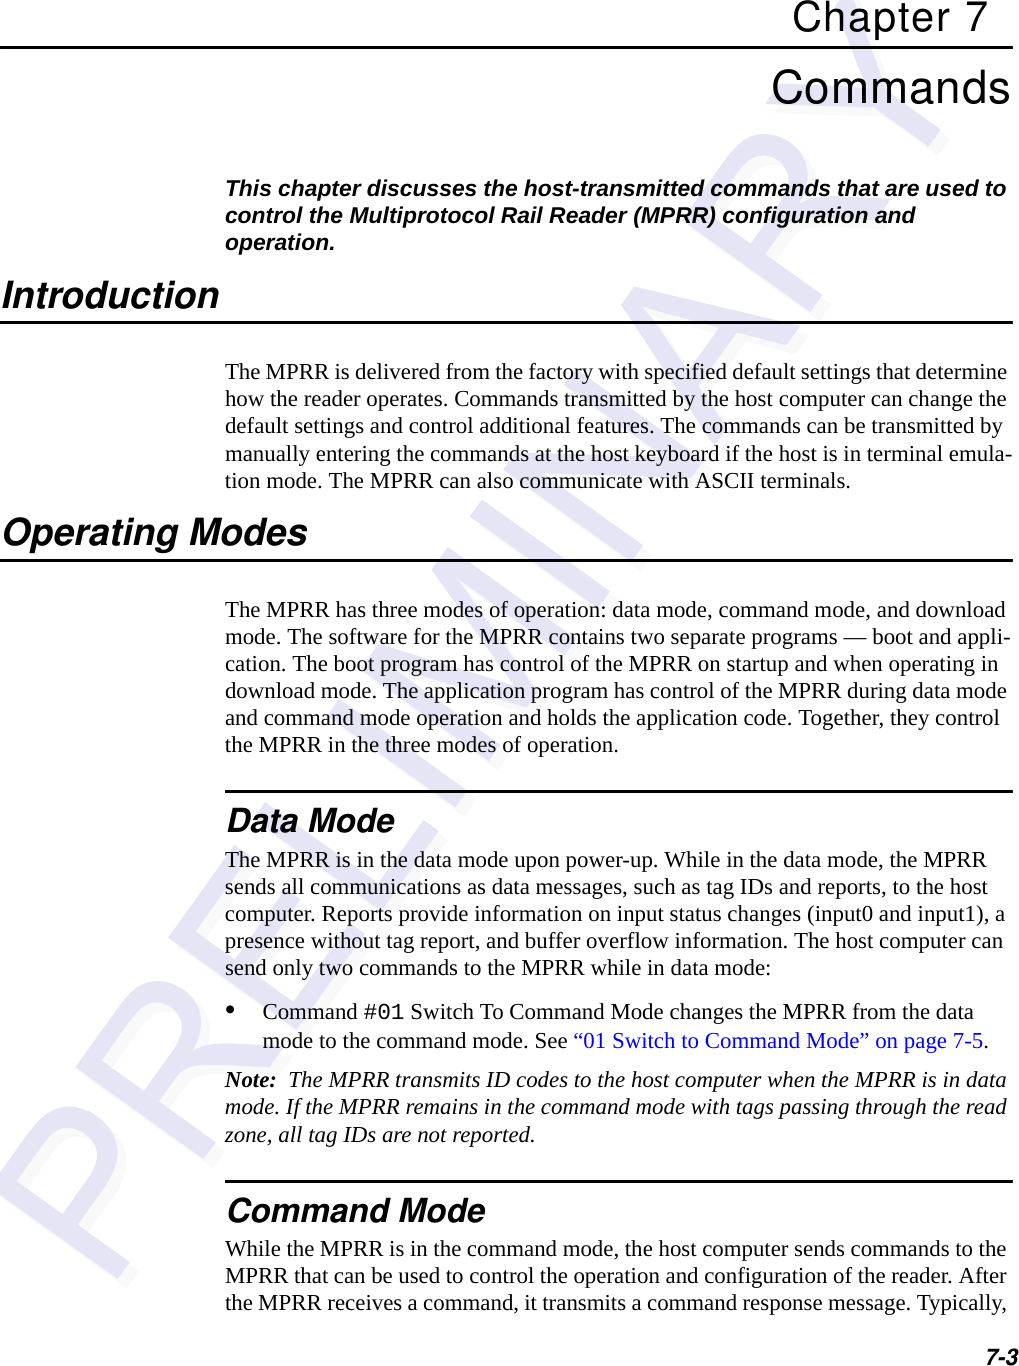 7-3Chapter 7CommandsThis chapter discusses the host-transmitted commands that are used to control the Multiprotocol Rail Reader (MPRR) configuration and operation.IntroductionThe MPRR is delivered from the factory with specified default settings that determine how the reader operates. Commands transmitted by the host computer can change the default settings and control additional features. The commands can be transmitted by manually entering the commands at the host keyboard if the host is in terminal emula-tion mode. The MPRR can also communicate with ASCII terminals.Operating ModesThe MPRR has three modes of operation: data mode, command mode, and download mode. The software for the MPRR contains two separate programs — boot and appli-cation. The boot program has control of the MPRR on startup and when operating in download mode. The application program has control of the MPRR during data mode and command mode operation and holds the application code. Together, they control the MPRR in the three modes of operation.Data ModeThe MPRR is in the data mode upon power-up. While in the data mode, the MPRR sends all communications as data messages, such as tag IDs and reports, to the host computer. Reports provide information on input status changes (input0 and input1), a presence without tag report, and buffer overflow information. The host computer can send only two commands to the MPRR while in data mode: •Command #01 Switch To Command Mode changes the MPRR from the data mode to the command mode. See “01 Switch to Command Mode” on page 7-5.Note:  The MPRR transmits ID codes to the host computer when the MPRR is in data mode. If the MPRR remains in the command mode with tags passing through the read zone, all tag IDs are not reported.Command ModeWhile the MPRR is in the command mode, the host computer sends commands to the MPRR that can be used to control the operation and configuration of the reader. After the MPRR receives a command, it transmits a command response message. Typically, 